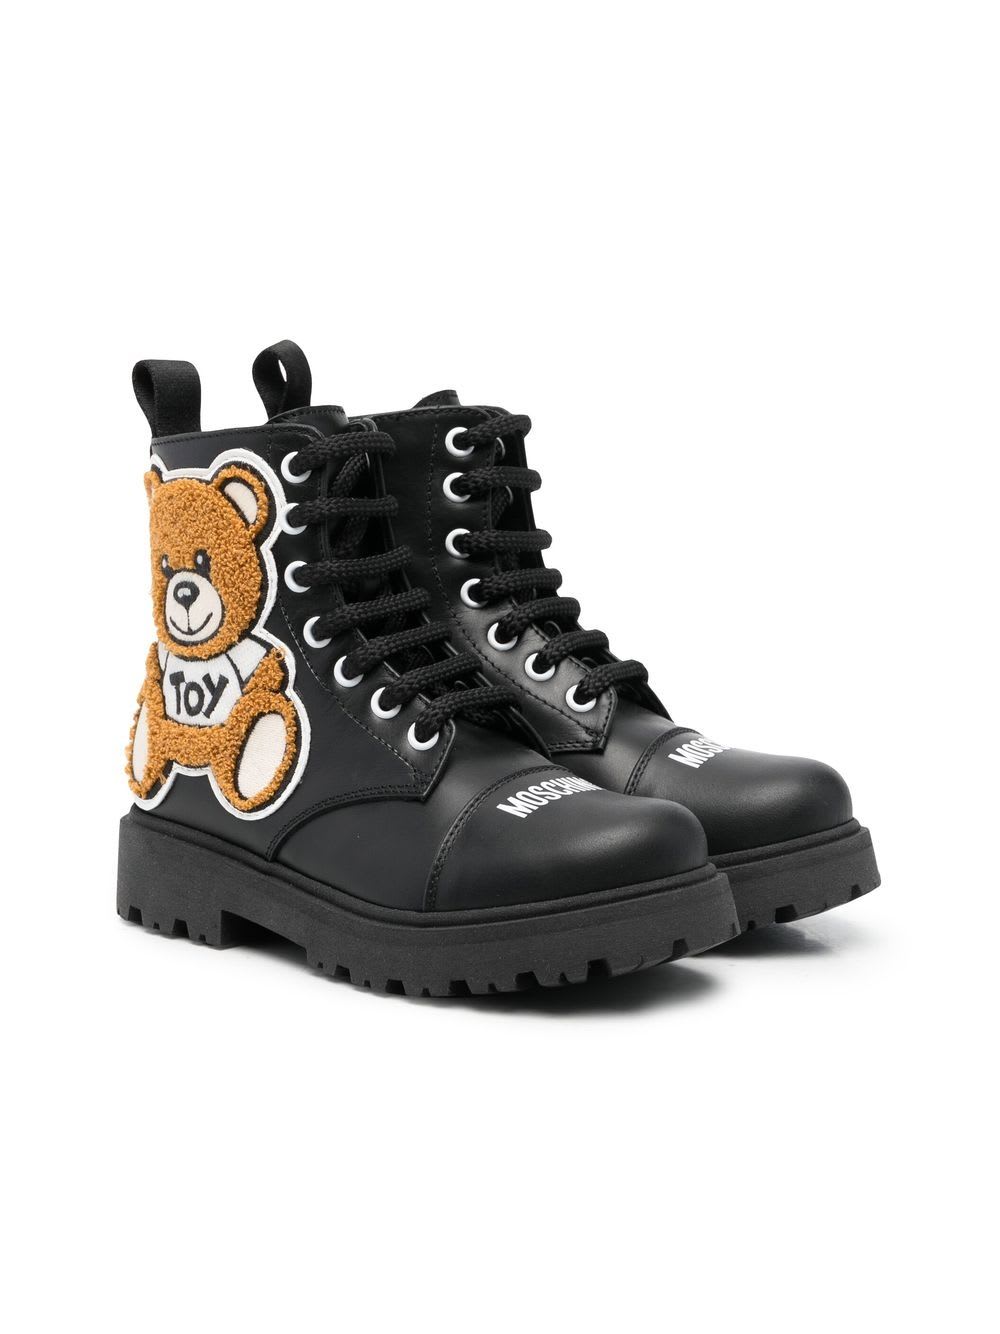 MOSCHINO TEDDY BEAR ANKLE BOOTS